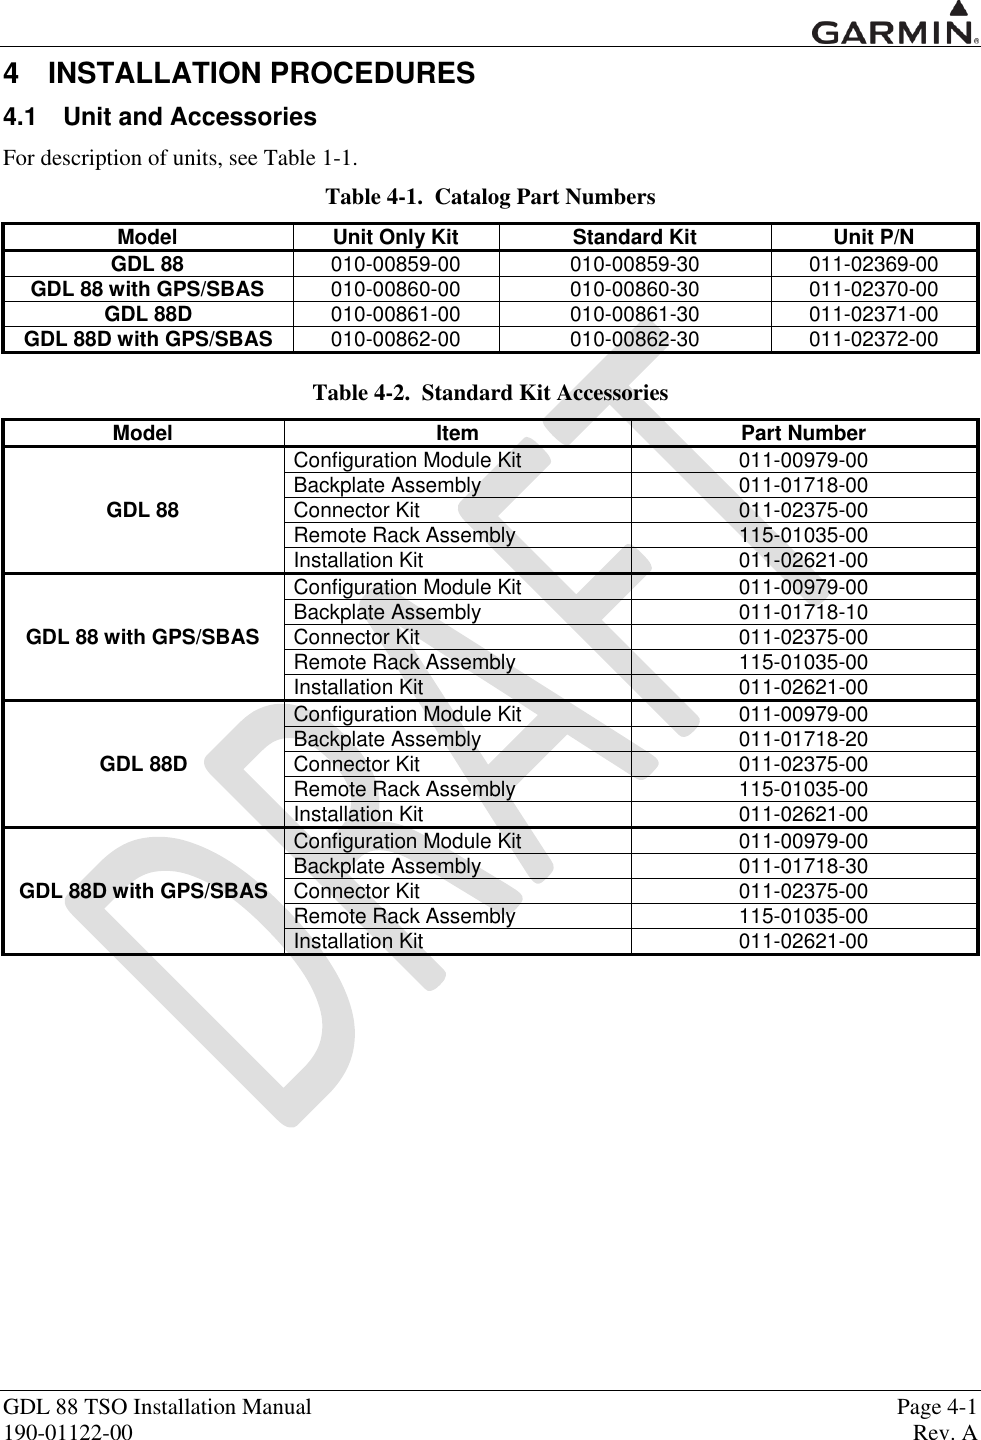  GDL 88 TSO Installation Manual    Page 4-1 190-01122-00  Rev. A  4  INSTALLATION PROCEDURES 4.1  Unit and Accessories For description of units, see Table 1-1. Table 4-1.  Catalog Part Numbers Model Unit Only Kit Standard Kit Unit P/N GDL 88 010-00859-00 010-00859-30 011-02369-00 GDL 88 with GPS/SBAS 010-00860-00 010-00860-30 011-02370-00 GDL 88D 010-00861-00 010-00861-30 011-02371-00 GDL 88D with GPS/SBAS 010-00862-00 010-00862-30 011-02372-00 Table 4-2.  Standard Kit Accessories Model Item Part Number GDL 88 Configuration Module Kit 011-00979-00 Backplate Assembly 011-01718-00 Connector Kit 011-02375-00 Remote Rack Assembly 115-01035-00 Installation Kit 011-02621-00 GDL 88 with GPS/SBAS Configuration Module Kit 011-00979-00 Backplate Assembly 011-01718-10 Connector Kit 011-02375-00 Remote Rack Assembly 115-01035-00 Installation Kit 011-02621-00 GDL 88D Configuration Module Kit 011-00979-00 Backplate Assembly 011-01718-20 Connector Kit 011-02375-00 Remote Rack Assembly 115-01035-00 Installation Kit 011-02621-00 GDL 88D with GPS/SBAS Configuration Module Kit 011-00979-00 Backplate Assembly 011-01718-30 Connector Kit 011-02375-00 Remote Rack Assembly 115-01035-00 Installation Kit 011-02621-00   